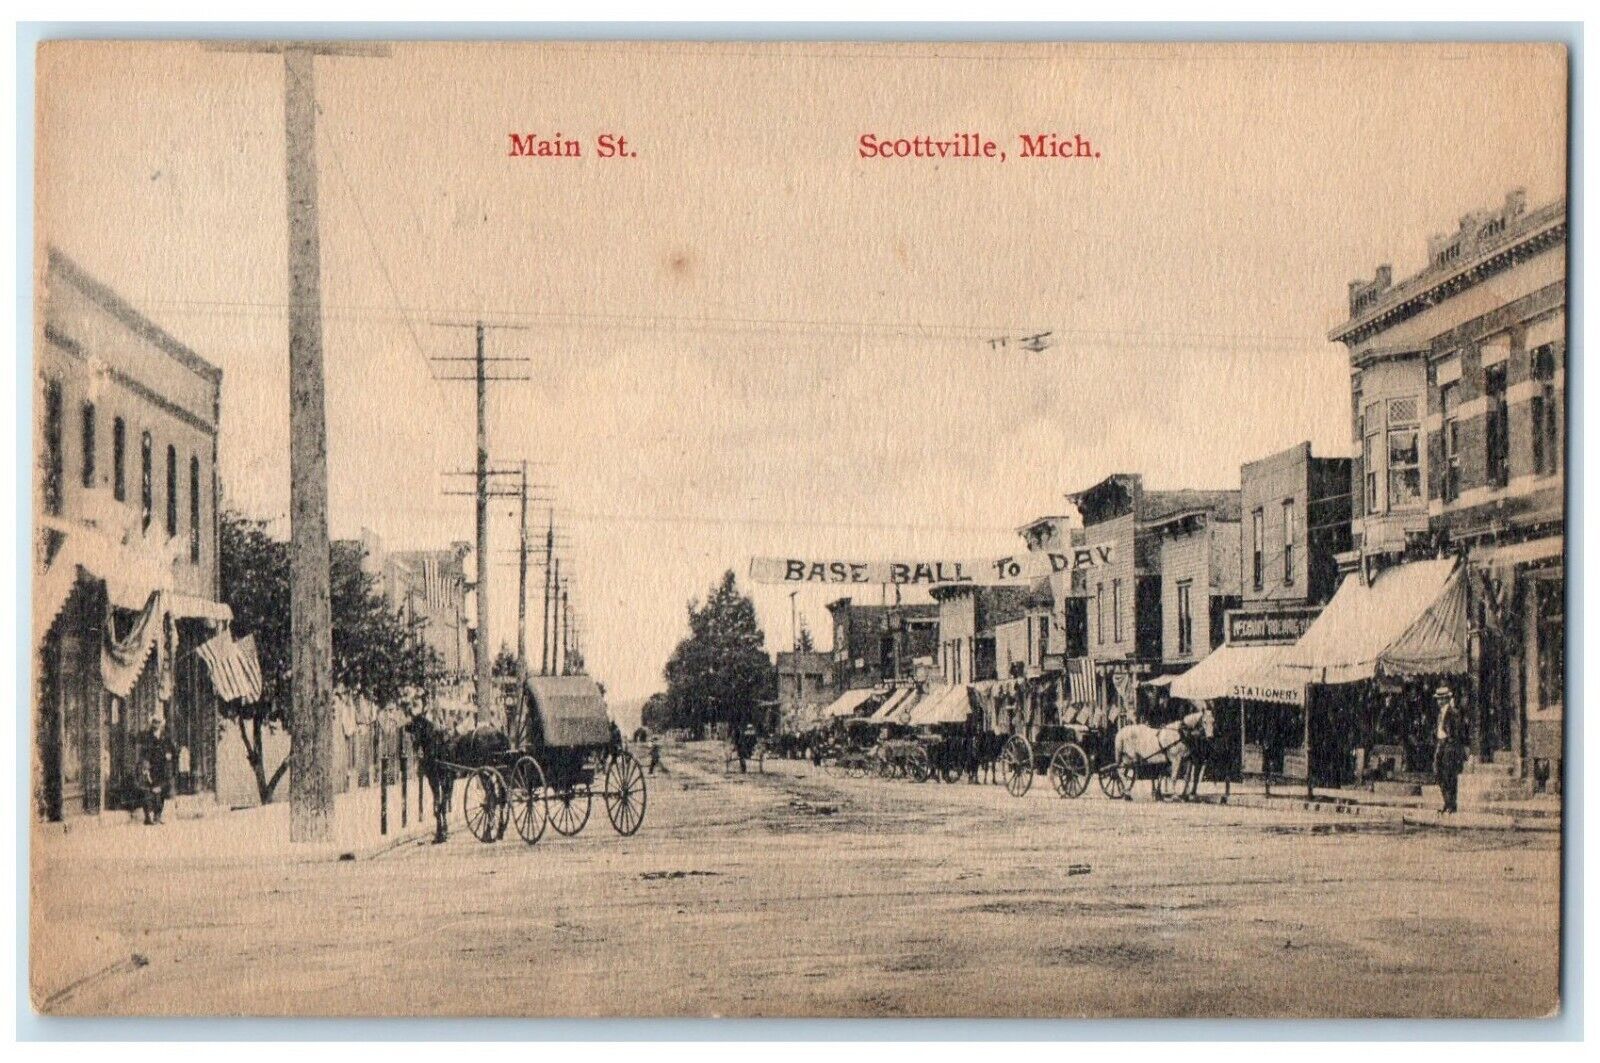 1915 Main Street Horse Carriage Road Scottville Michigan Posted Vintage Postcard